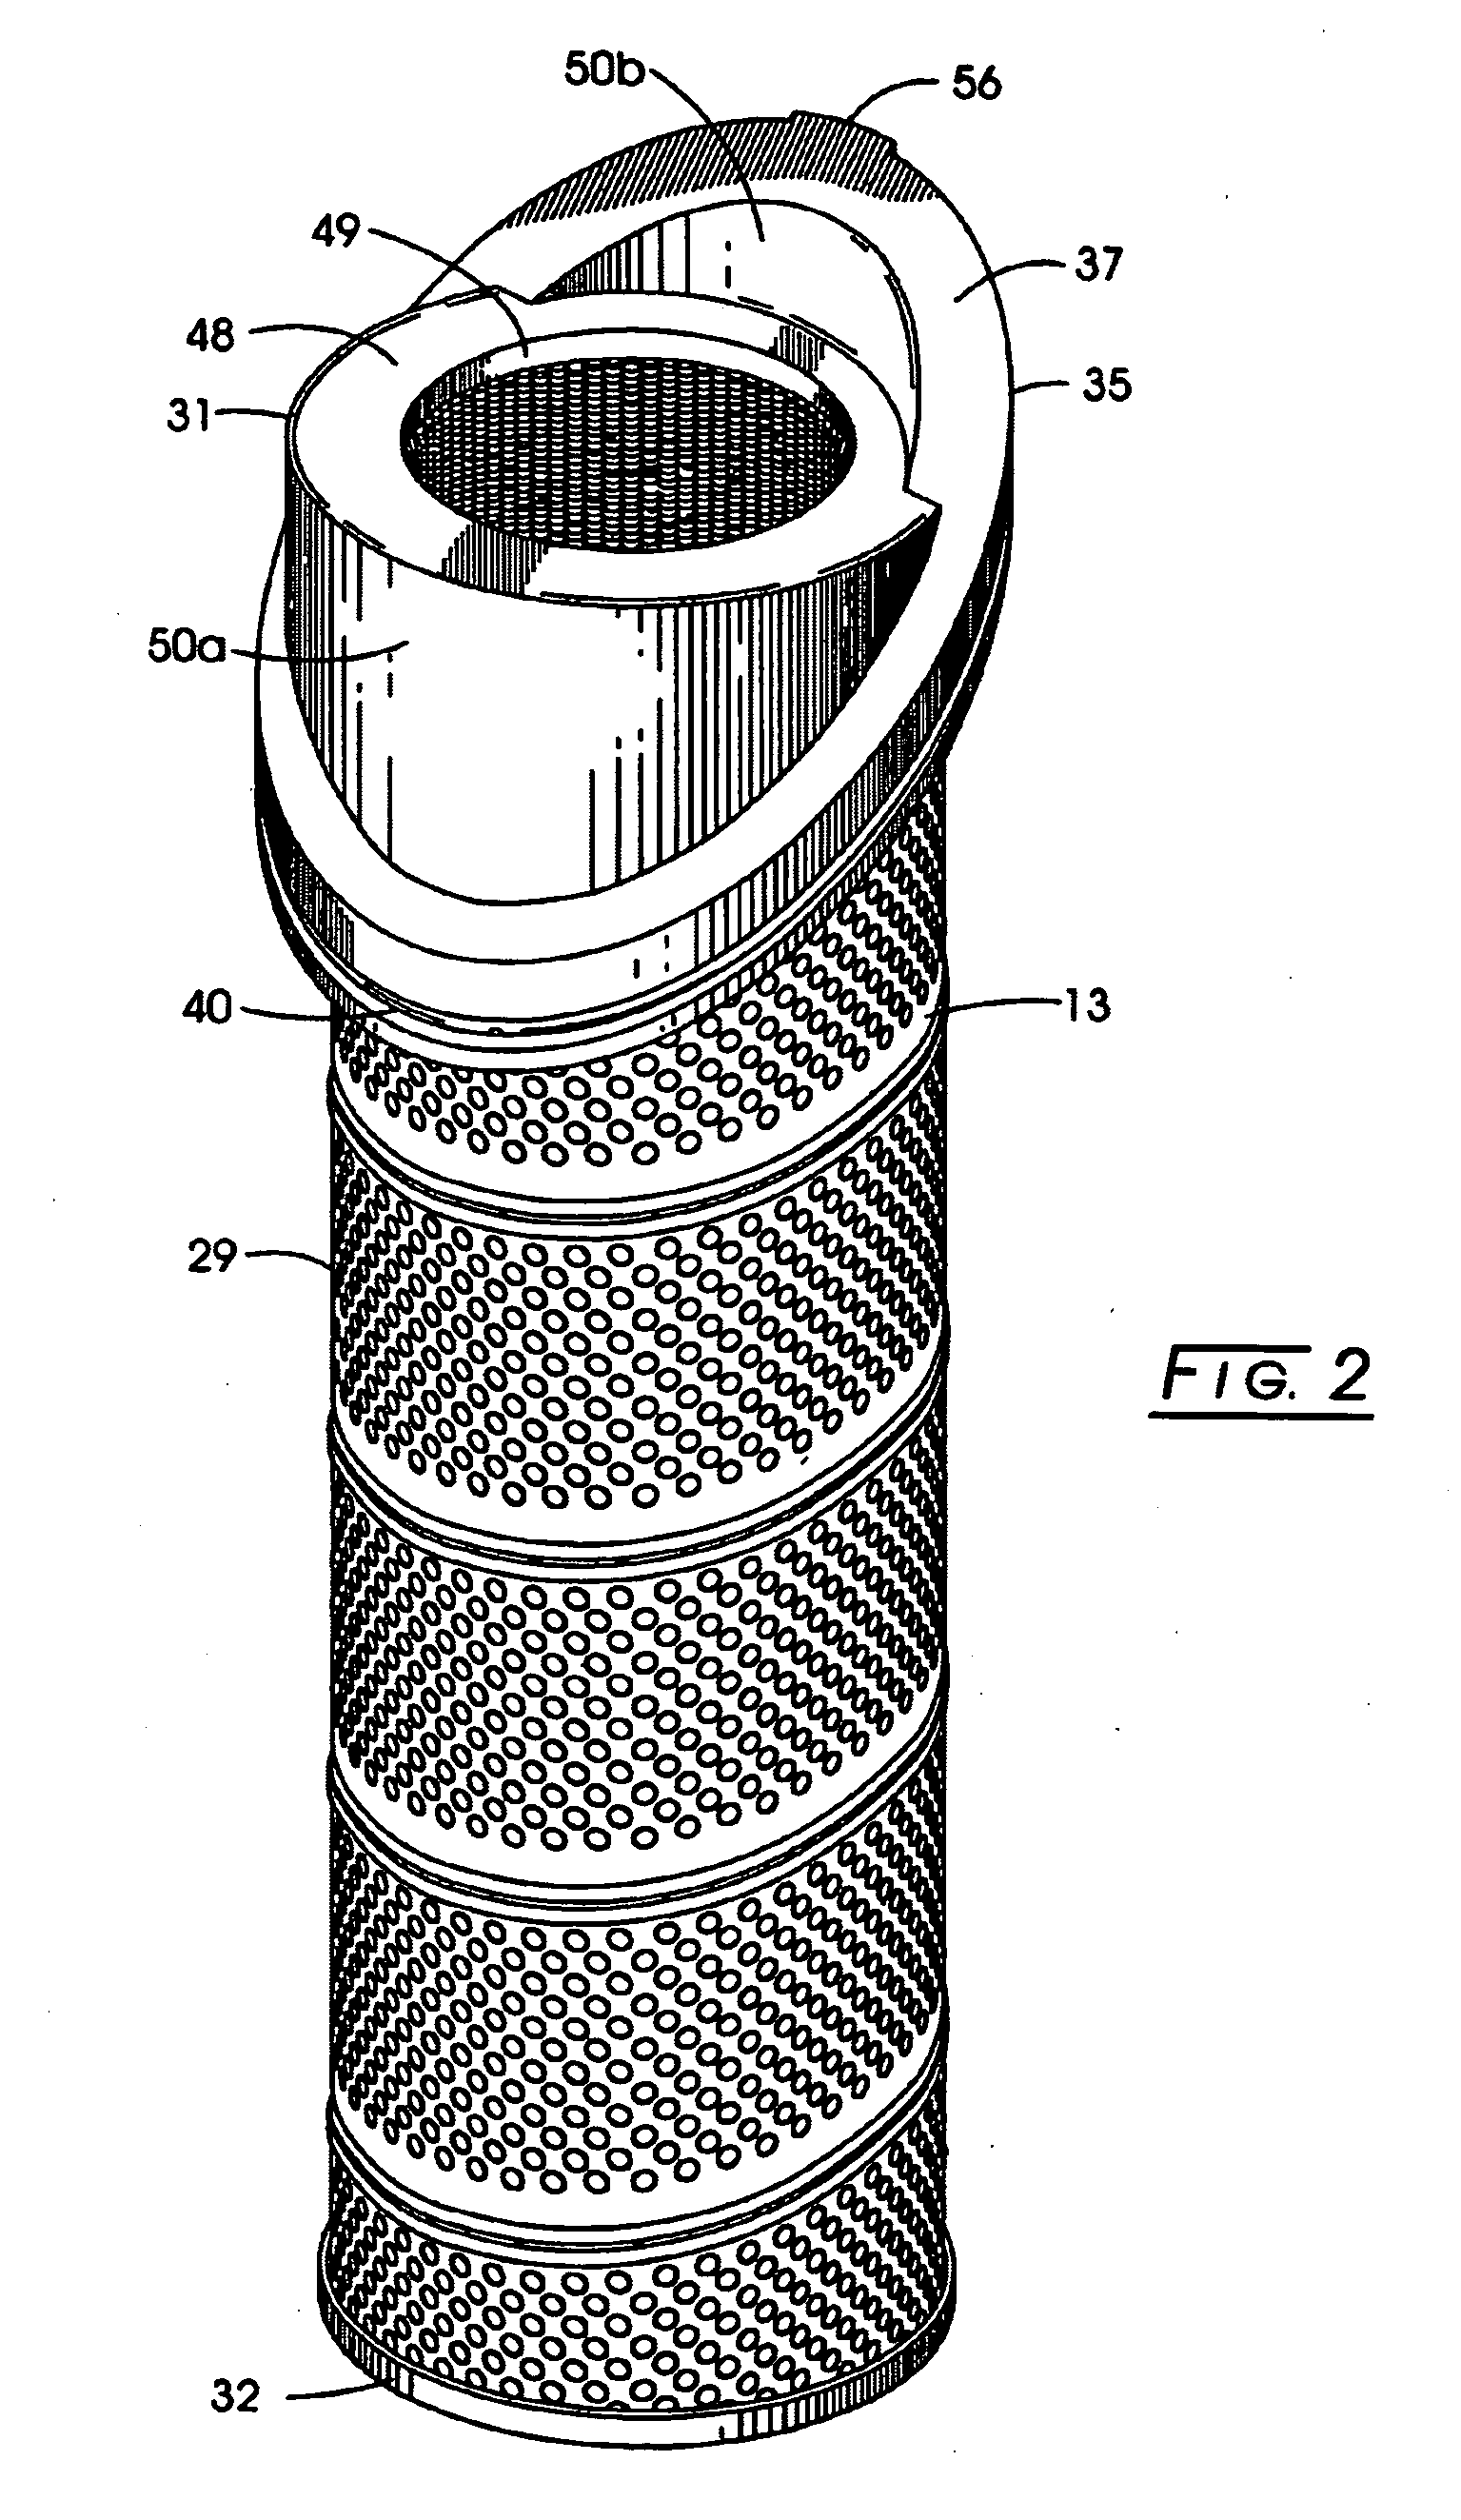 Filter element with off-axis end cap